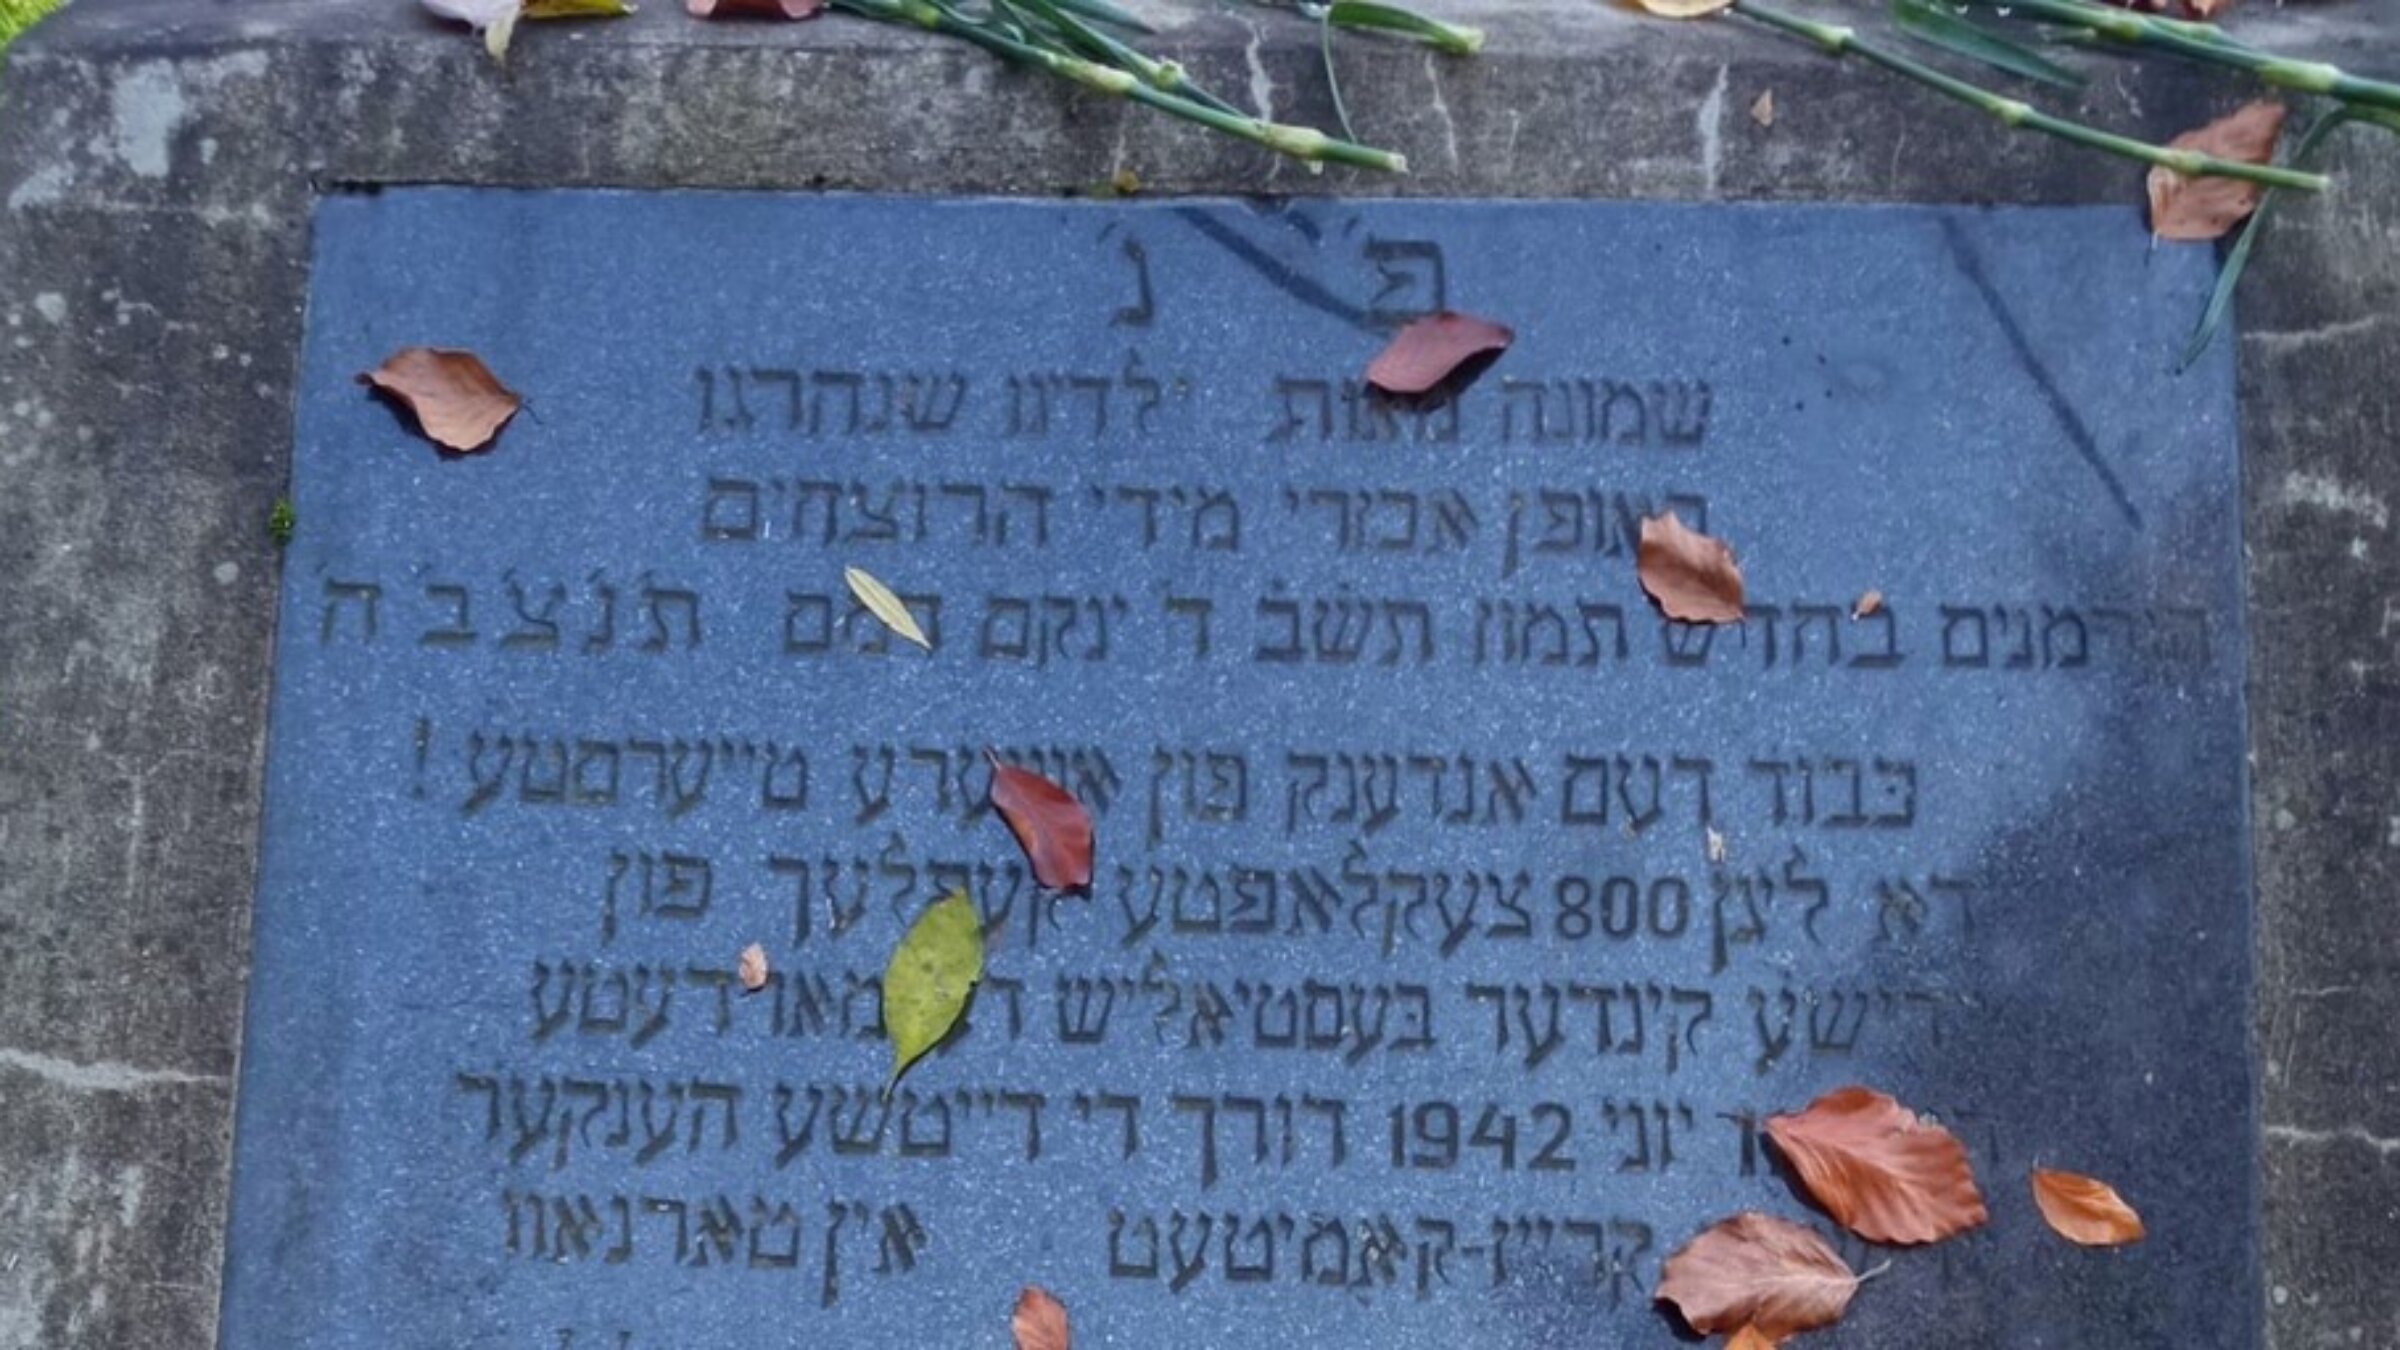 A memorial plaque in the forest outside of Tarnow where 800 Jewish children from the Jewish orphanage in Tarnow were murdered in June 1942
